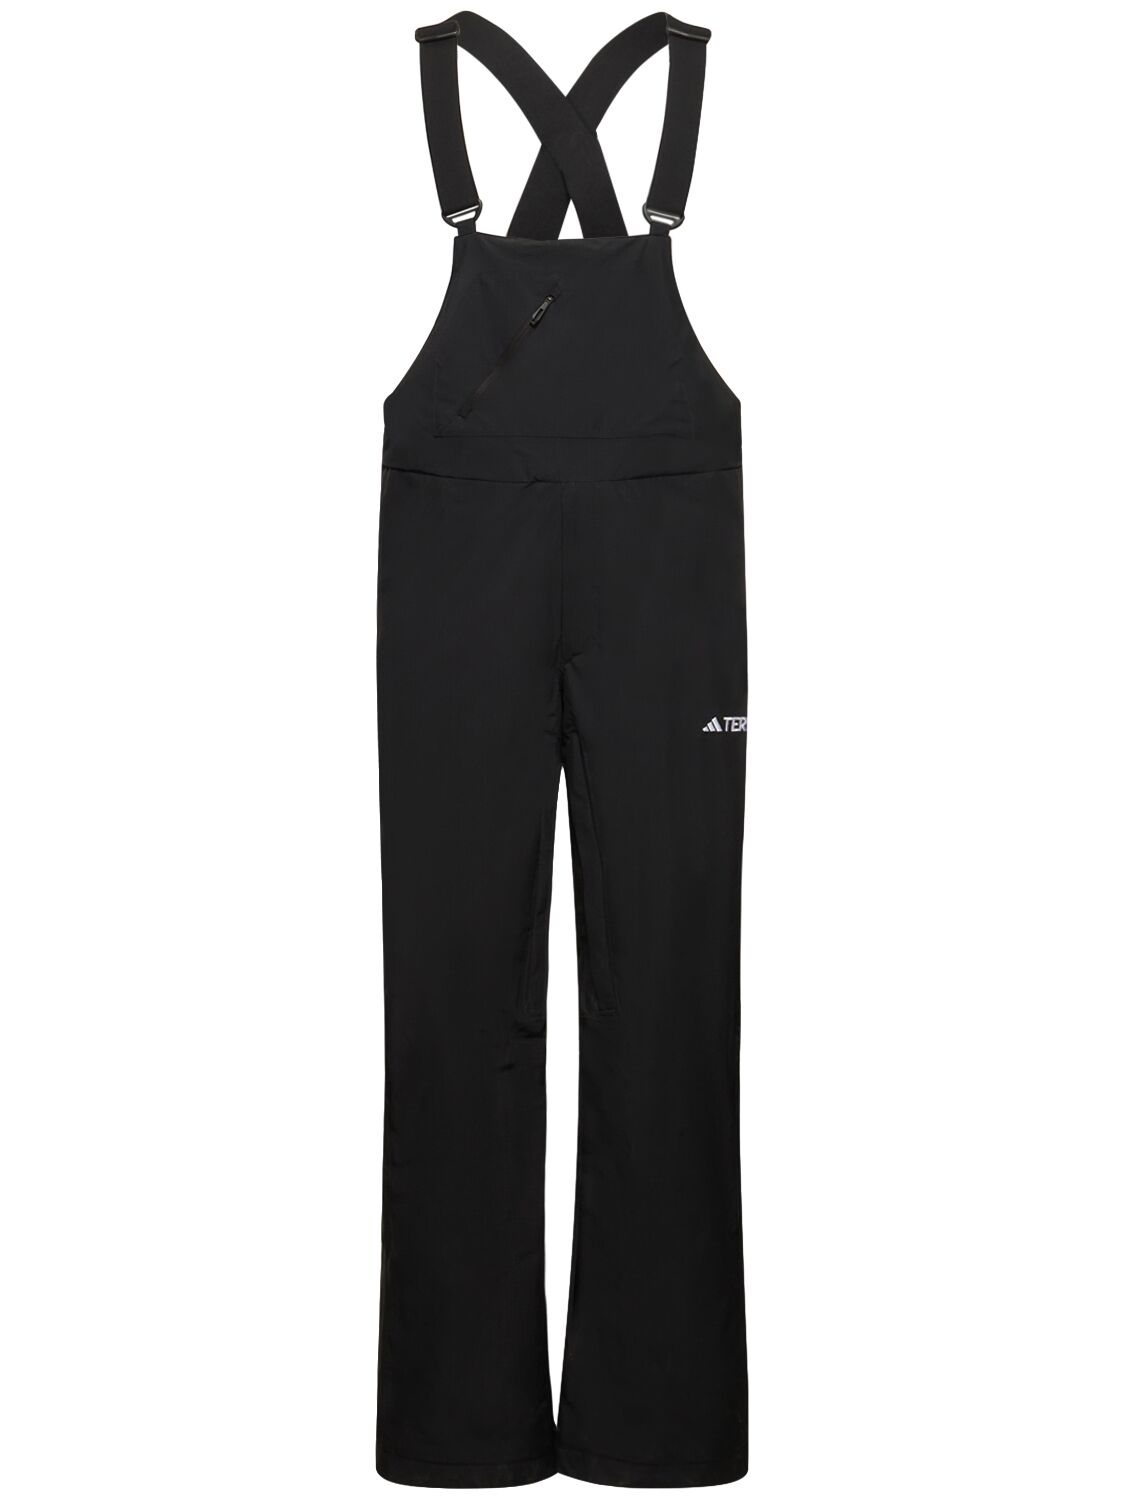 Insulated Technical Overalls – MEN > CLOTHING > OVERALLS & JUMPSUITS